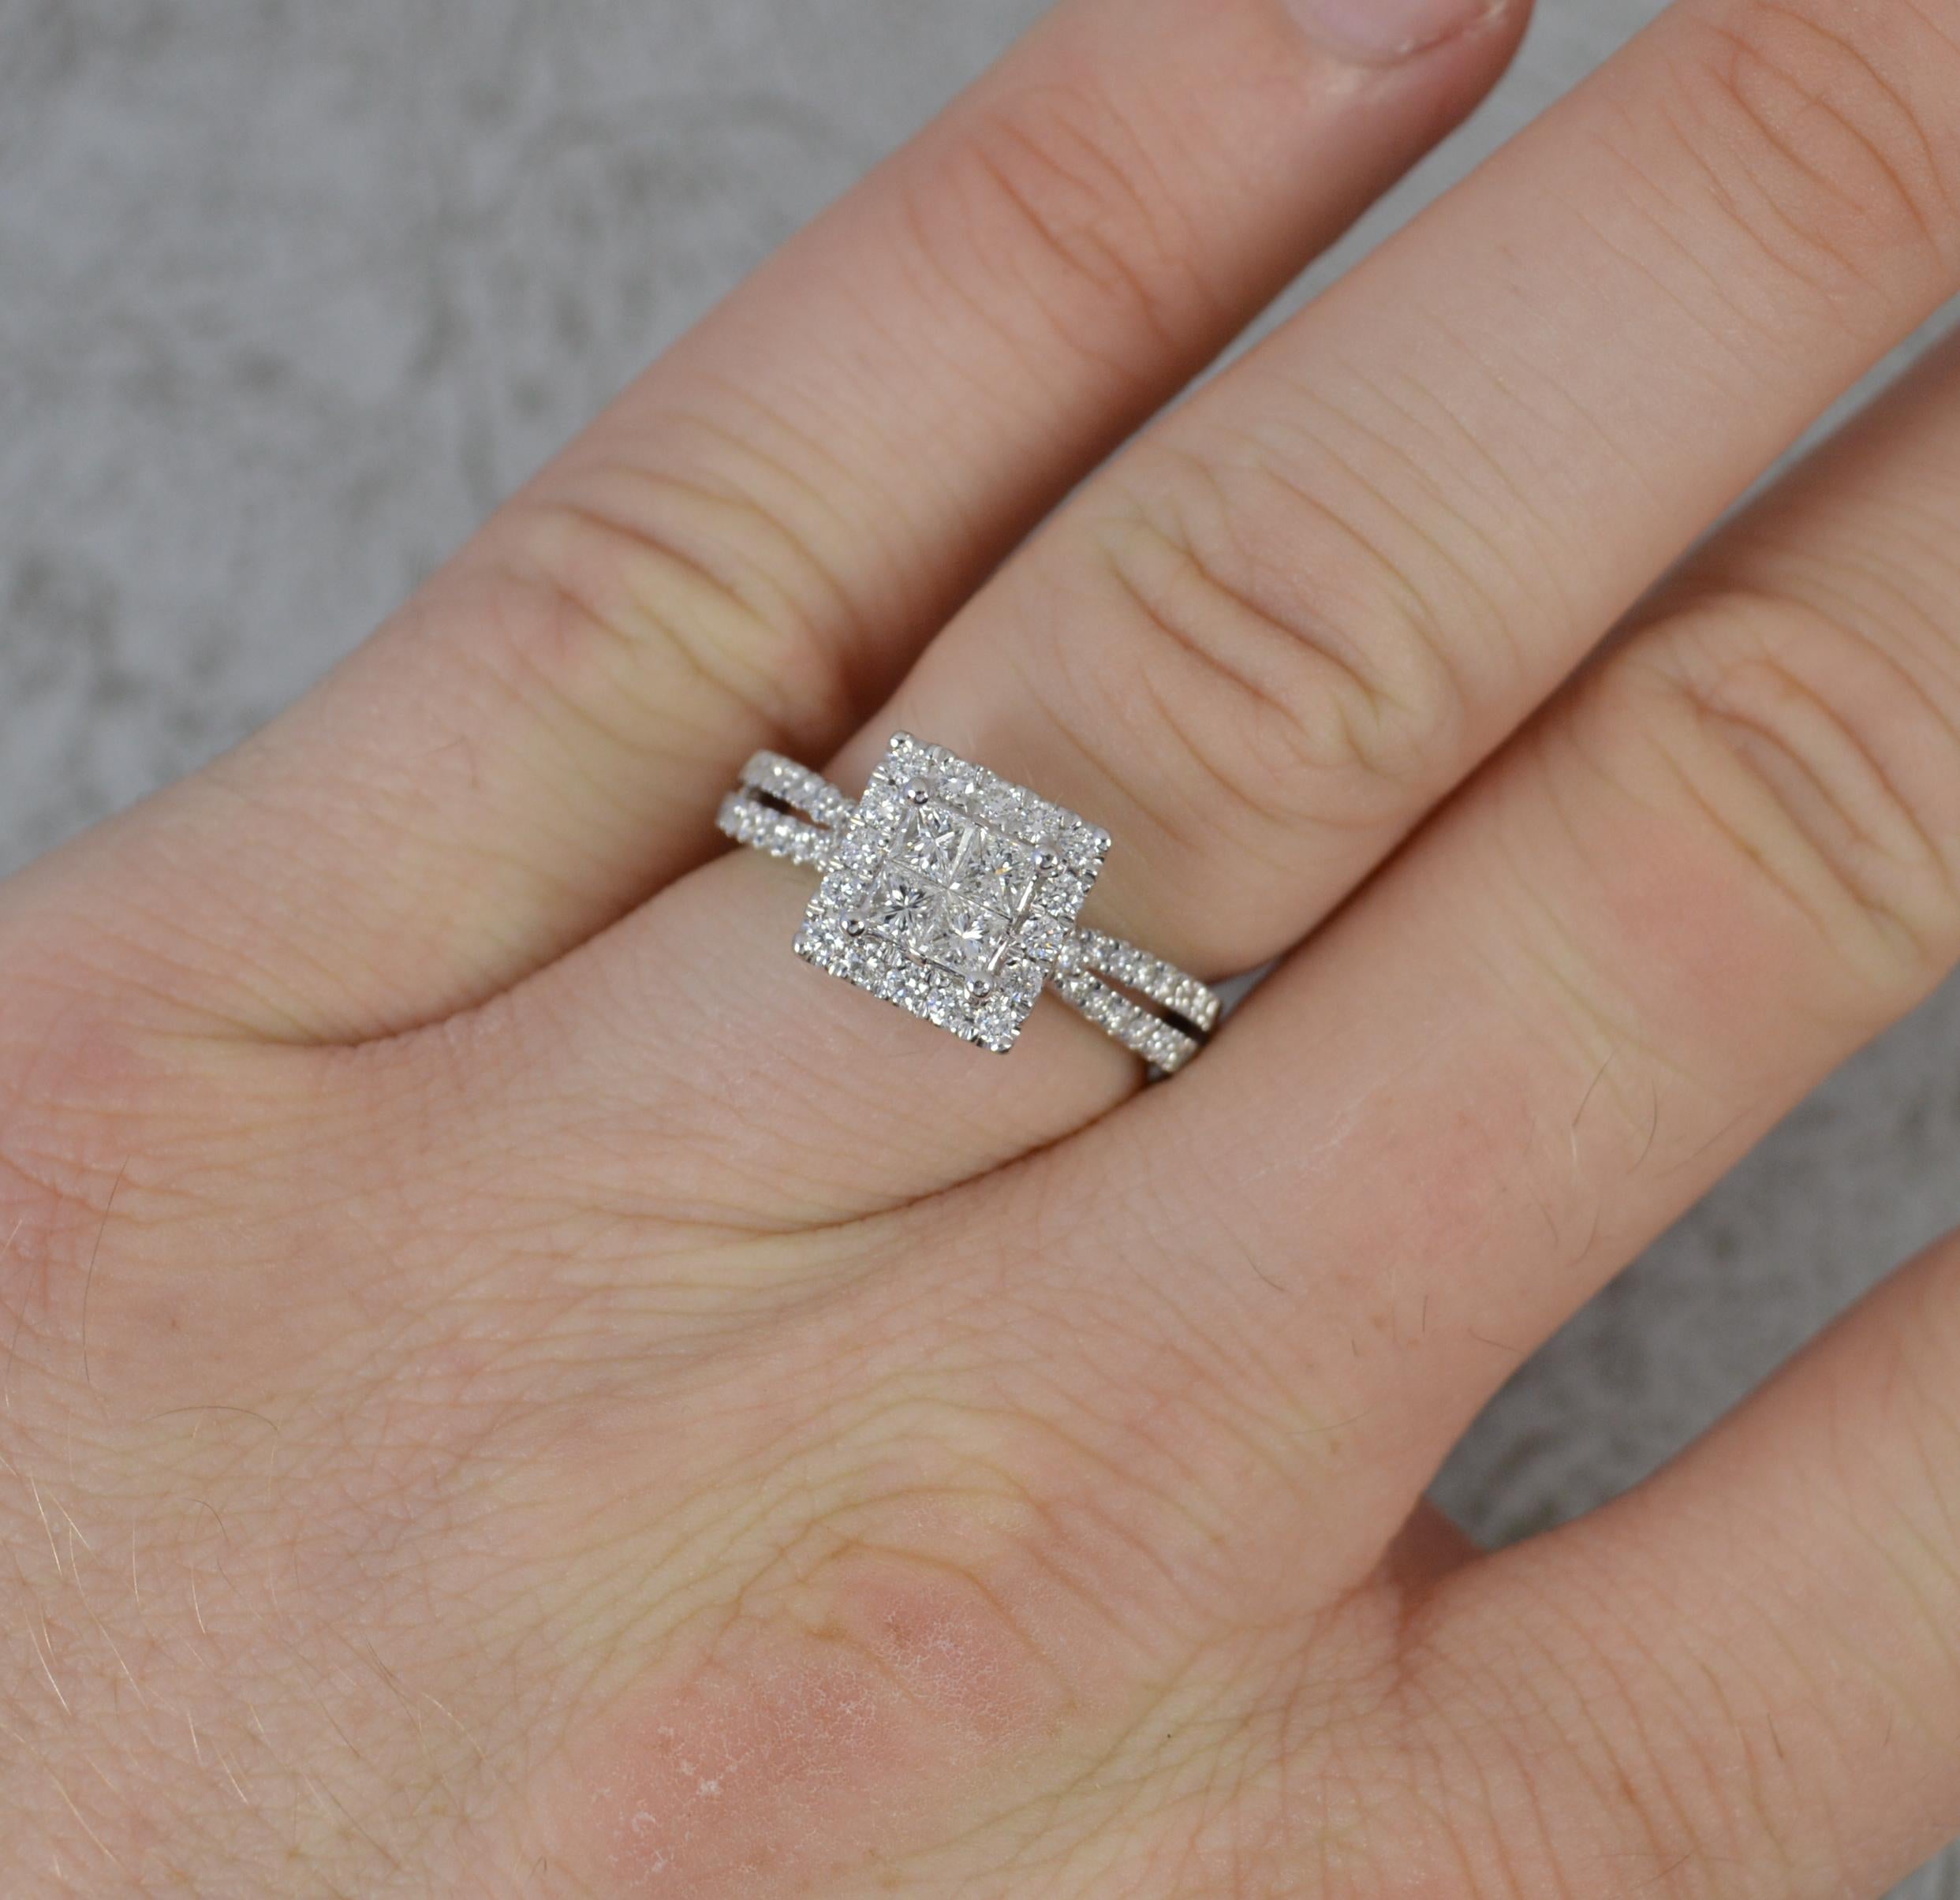 A superb diamond ring.
Solid 950 grade platinum shank.
Set with four princess cut diamonds to the centre with a full border of smaller round cut diamonds and additional diamonds to the shoulders. Vs clarity, f-g colour.
8.9mm x 9.1mm cluster